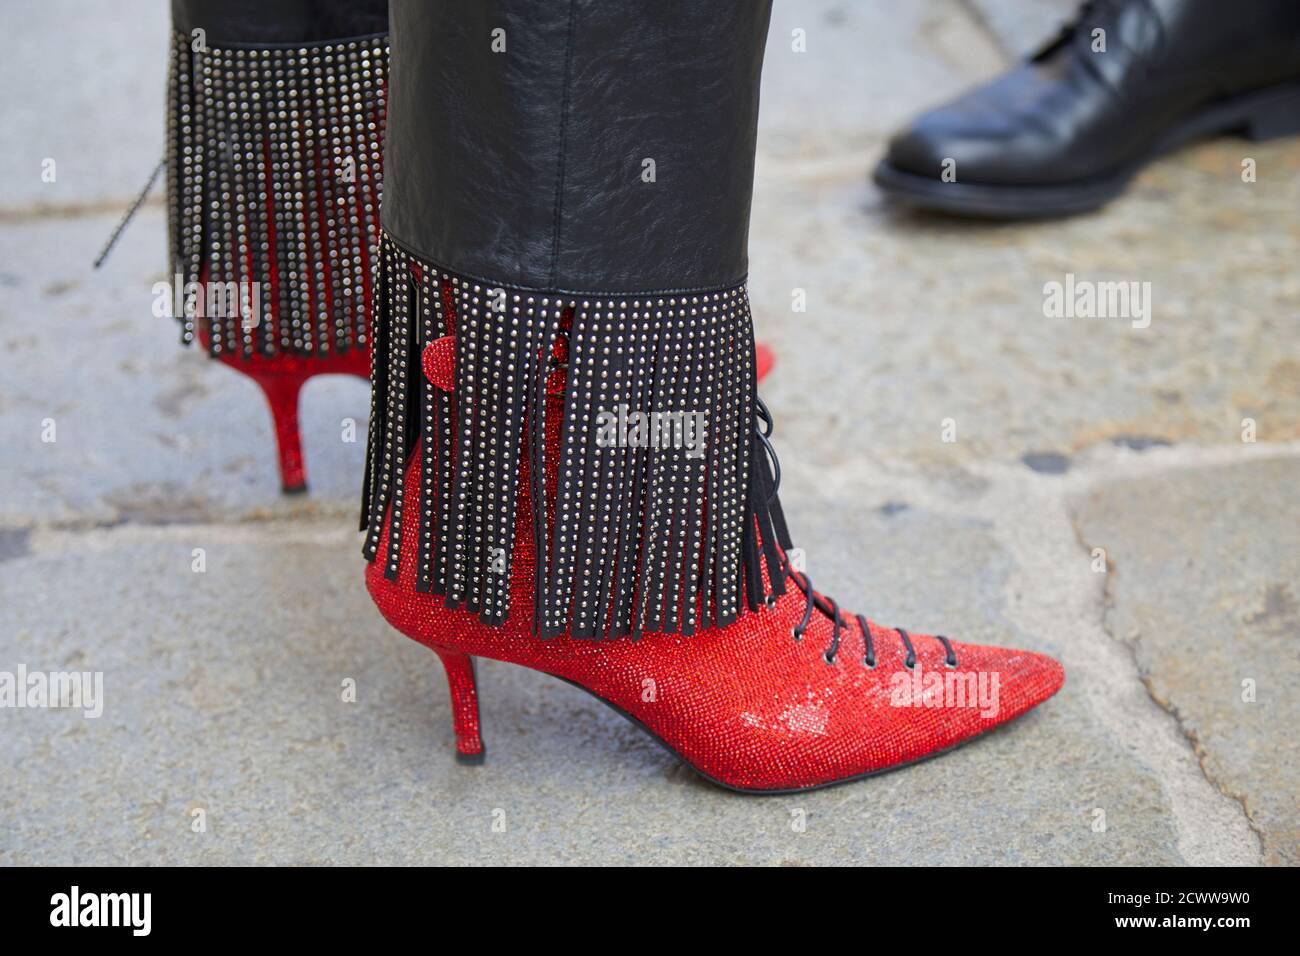 MILAN, ITALY - SEPTEMBER 26, 2020: Woman with red glitter high heel shoes and leather trousers with fringes before Philosophy fashion show, Milan Fash Stock Photo